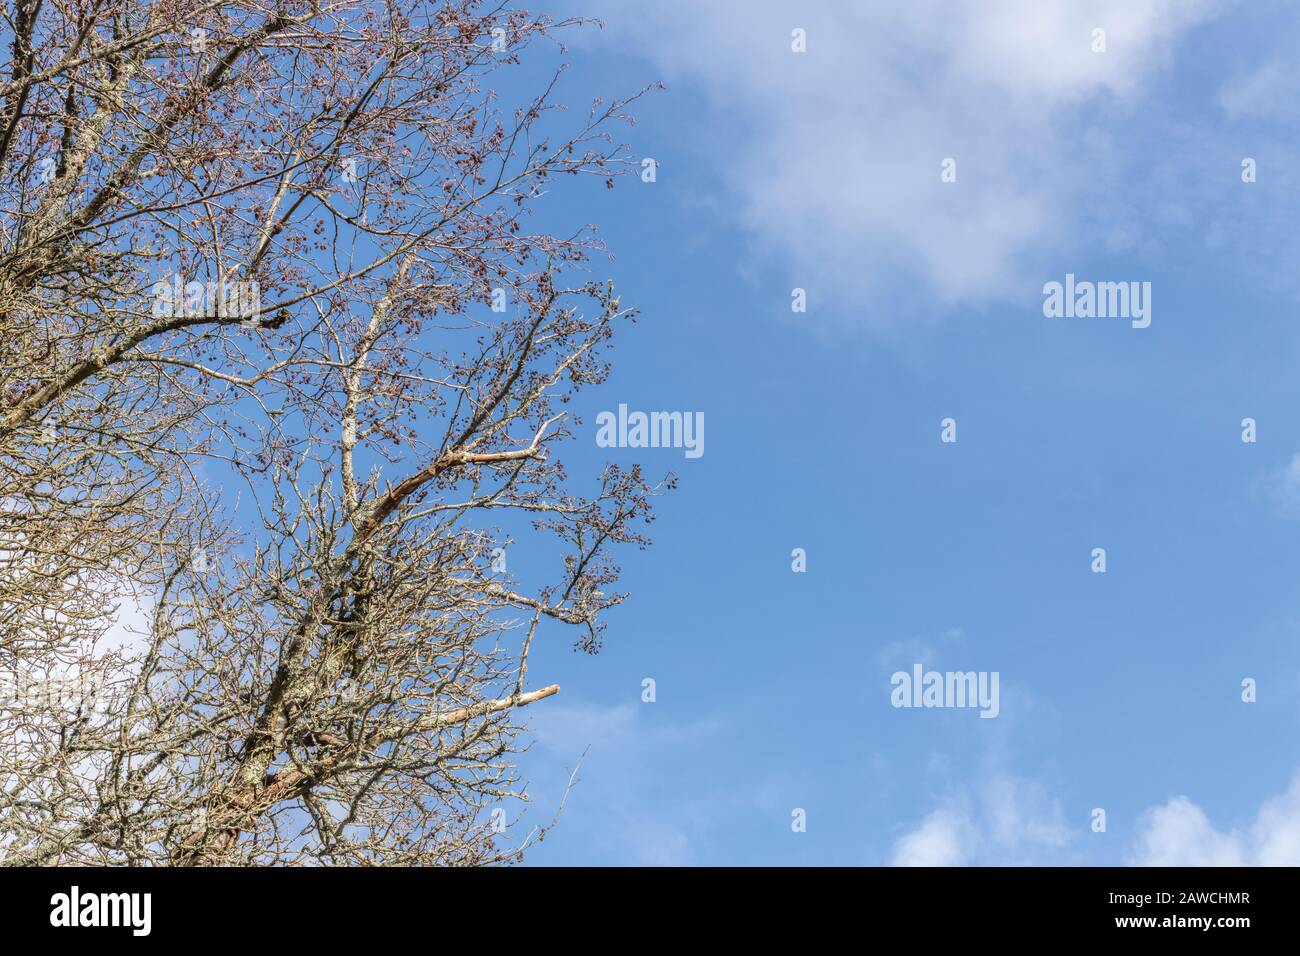 Branches with cone-like fruits of Common Alder / Alnus glutinosa against a blue Spring sky. Once used as a medicinal plant in herbal remedies. Stock Photo